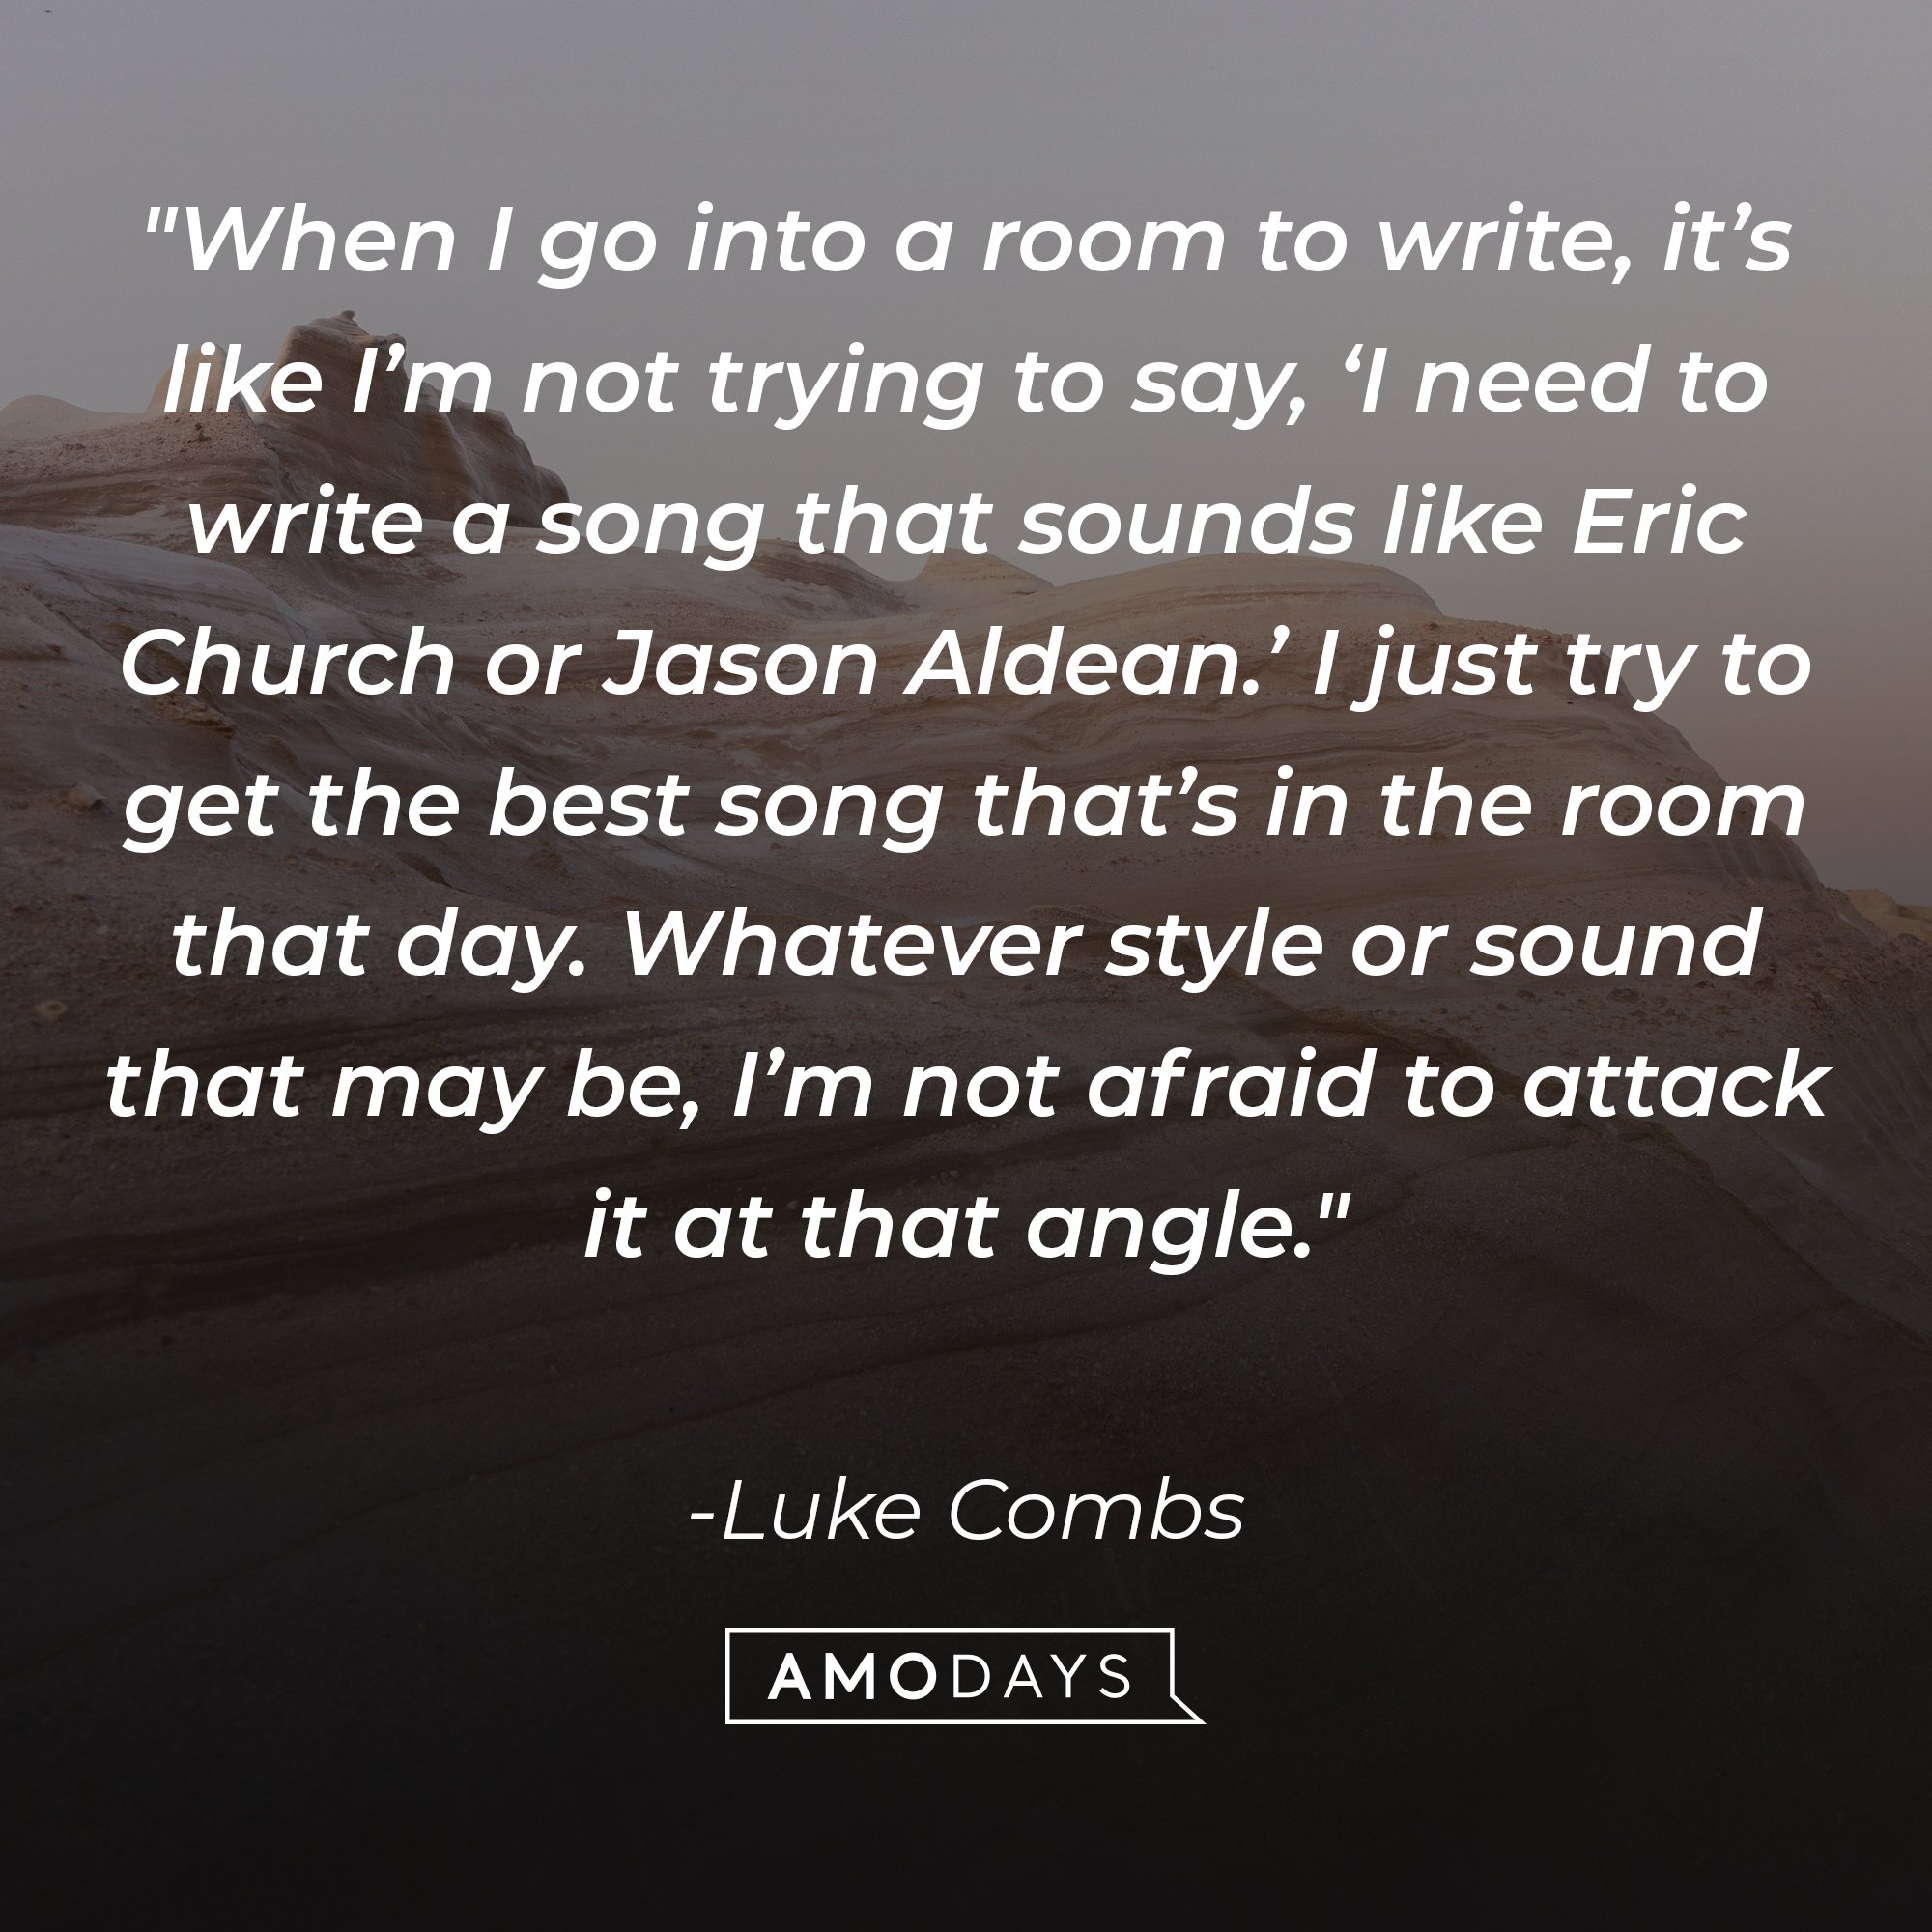 Luke Combs's quote "When I go into a room to write, it’s like I’m not trying to say, ‘I need to write a song that sounds like Eric Church or Jason Aldean.’ I just try to get the best song that’s in the room that day. Whatever style or sound that may be, I’m not afraid to attack it at that angle." | Source: Unsplash.com